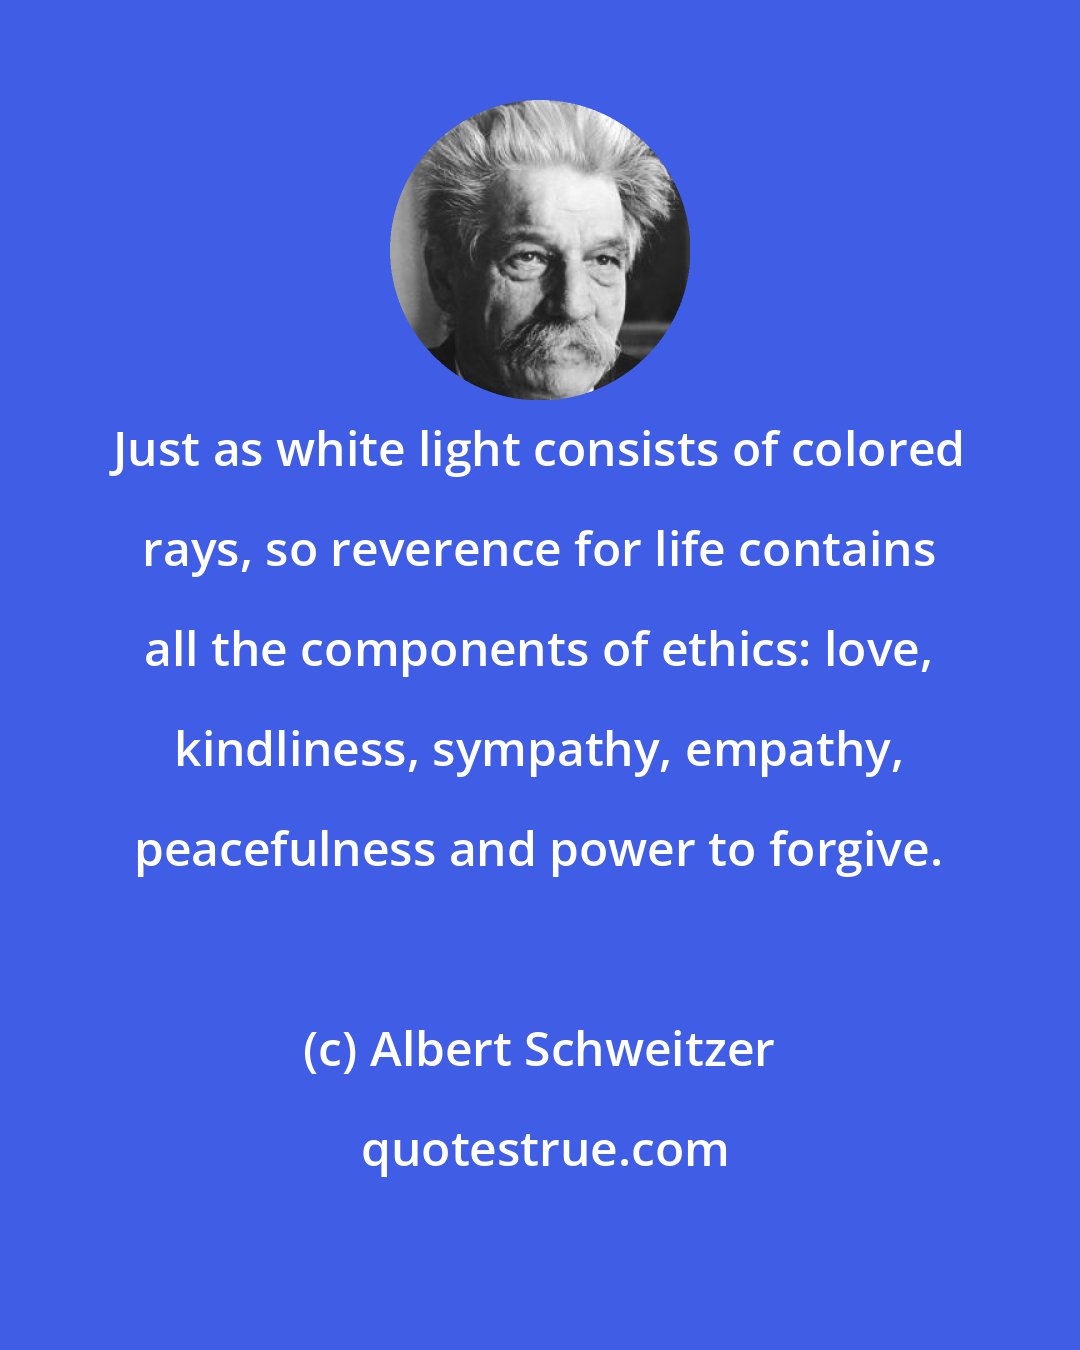 Albert Schweitzer: Just as white light consists of colored rays, so reverence for life contains all the components of ethics: love, kindliness, sympathy, empathy, peacefulness and power to forgive.